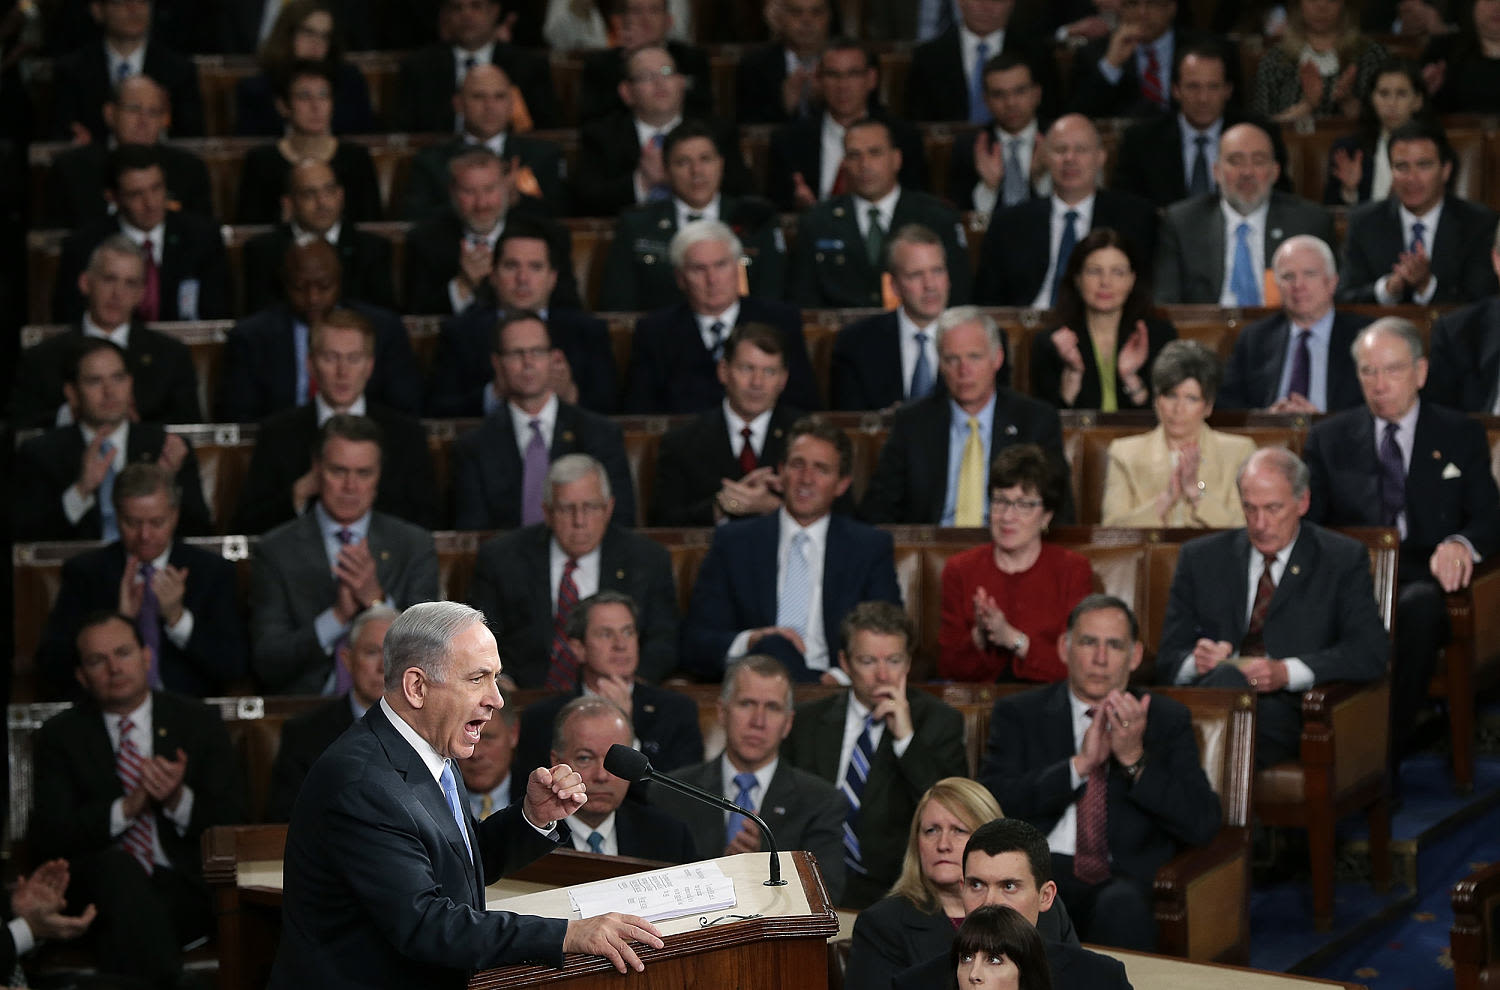 Opinion | I’m the youngest Jewish member of Congress. Here’s why I’m not attending Netanyahu’s address.